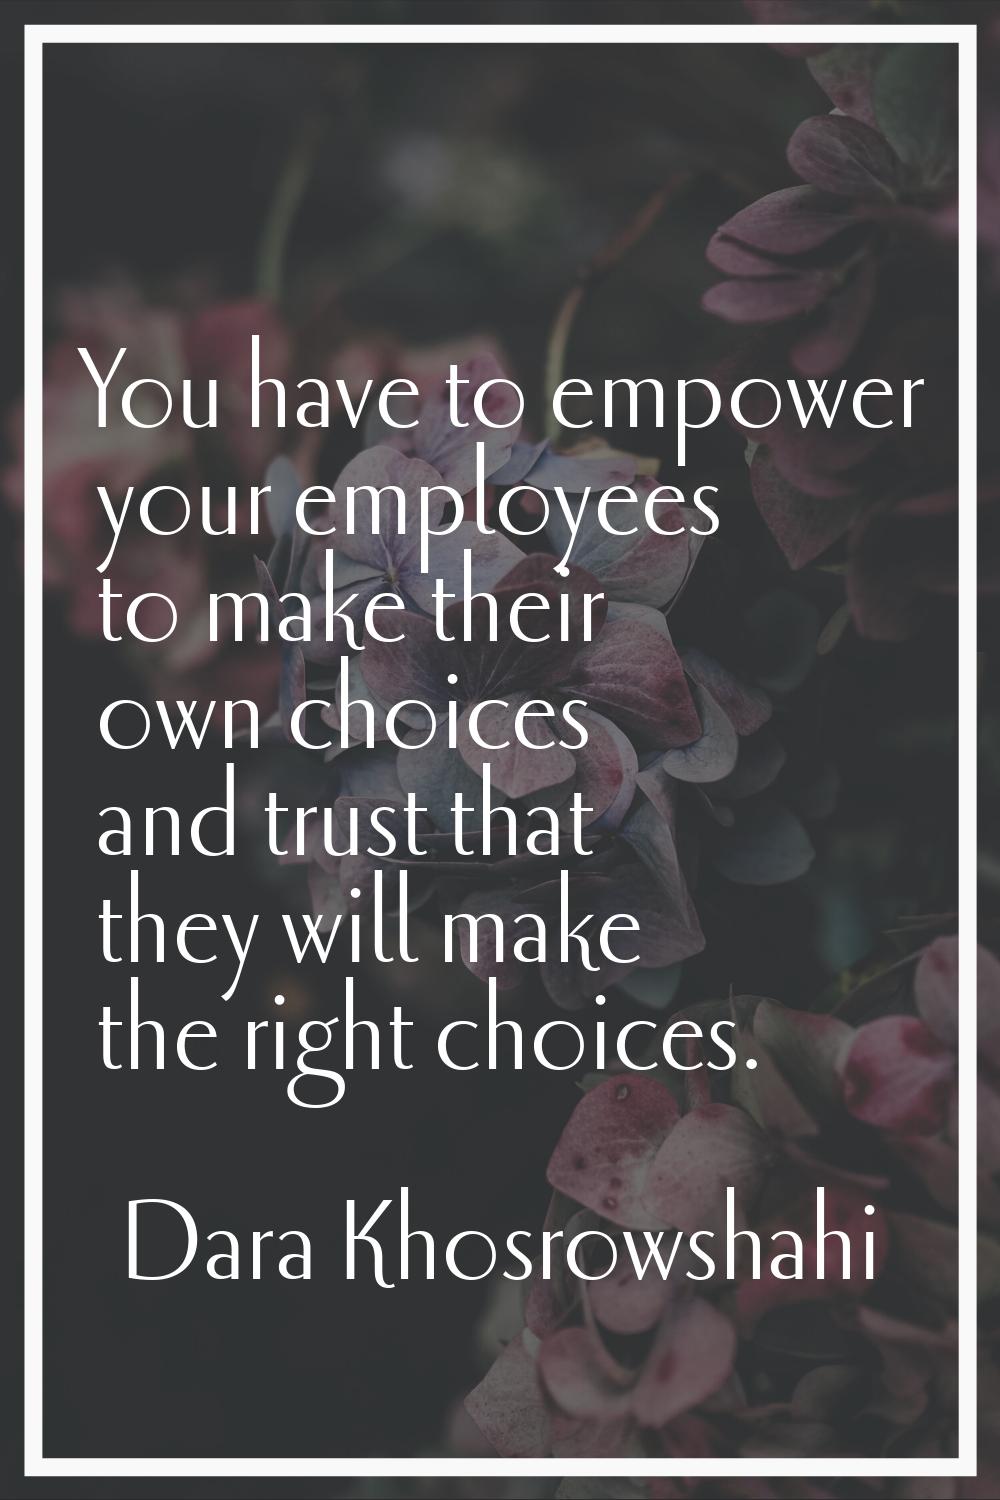 You have to empower your employees to make their own choices and trust that they will make the righ